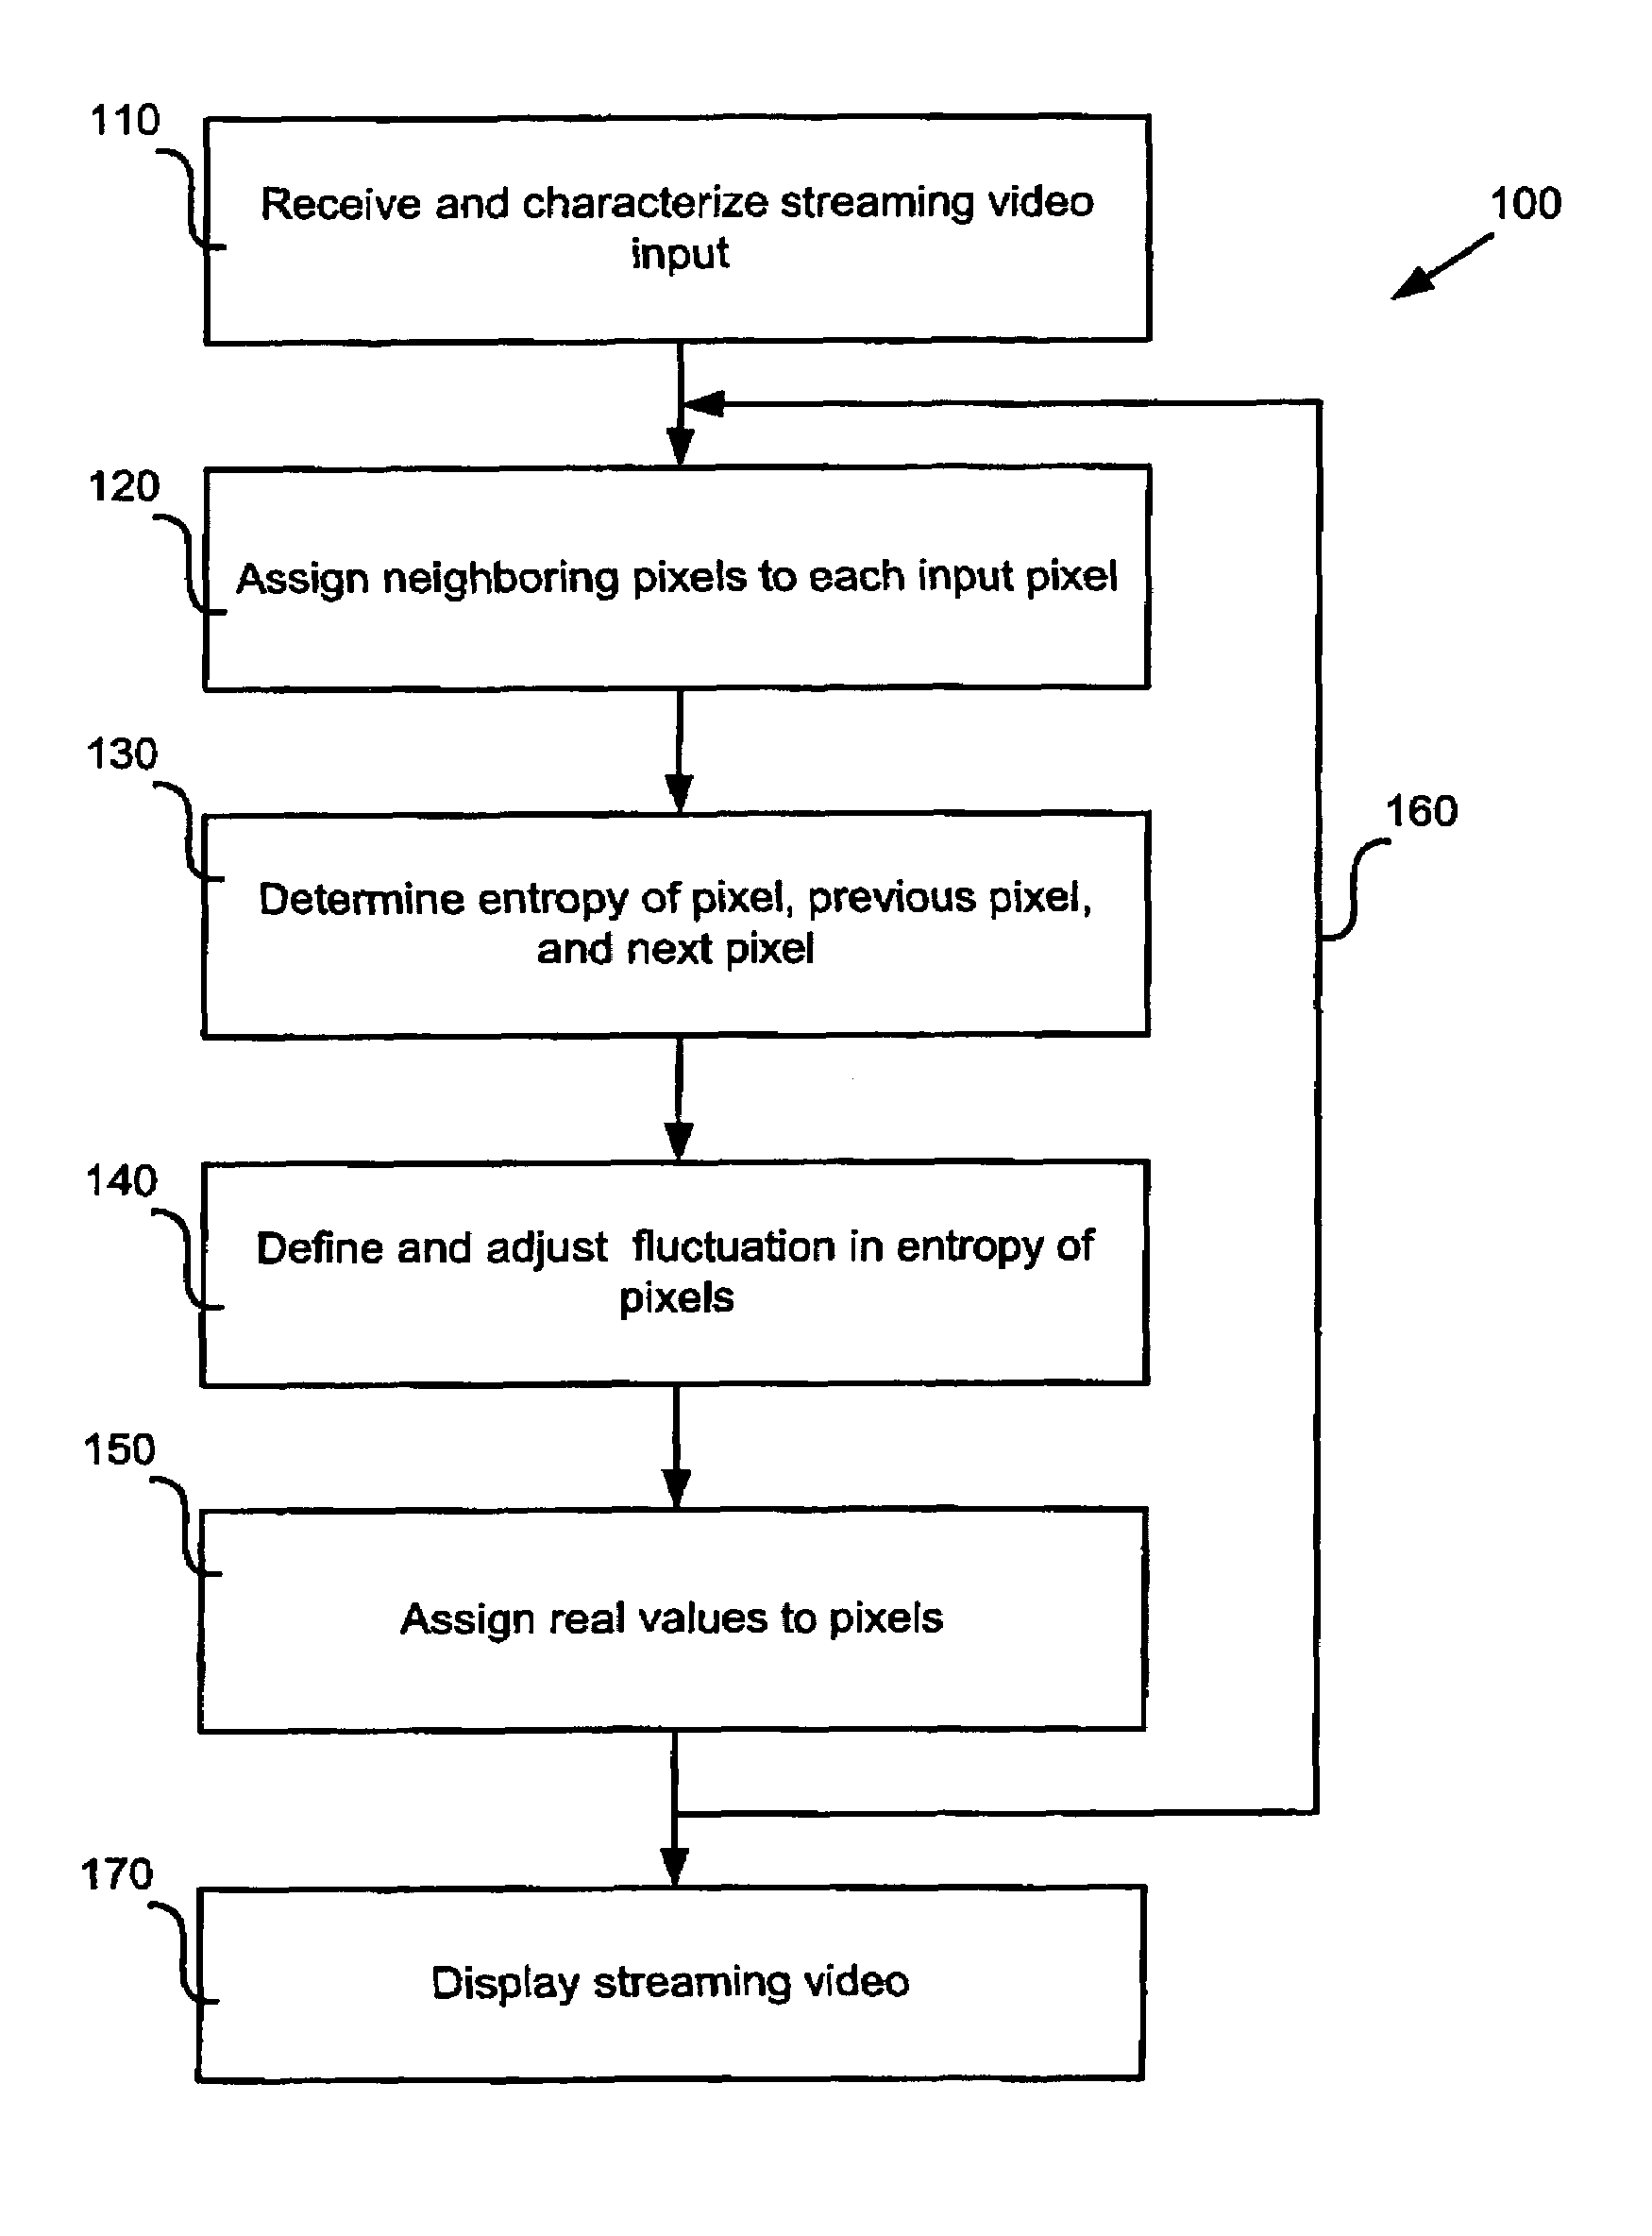 Method for determining entropy of a pixel of a real time streaming digital video image signal, and applications thereof